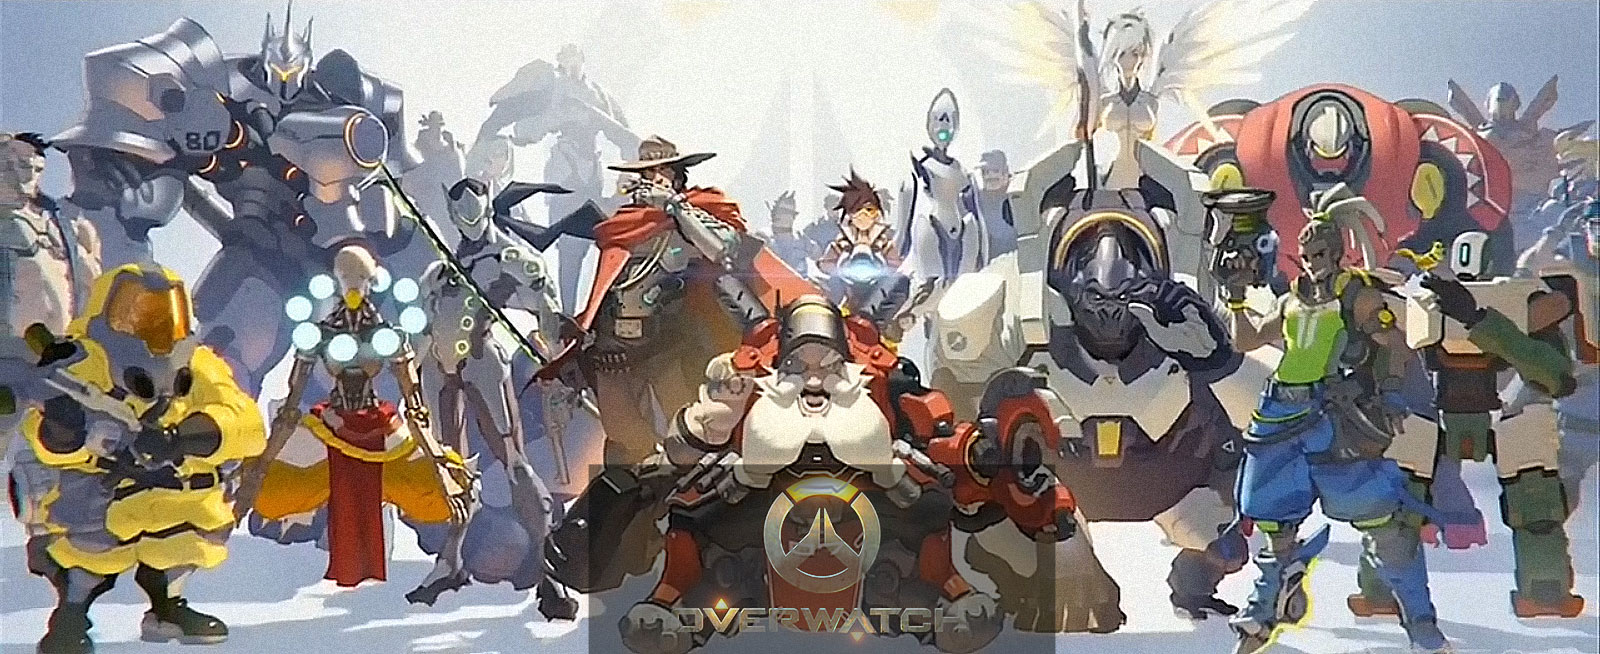 Overwatch Blizzard S New Game Is Here Trailer And Gameplay